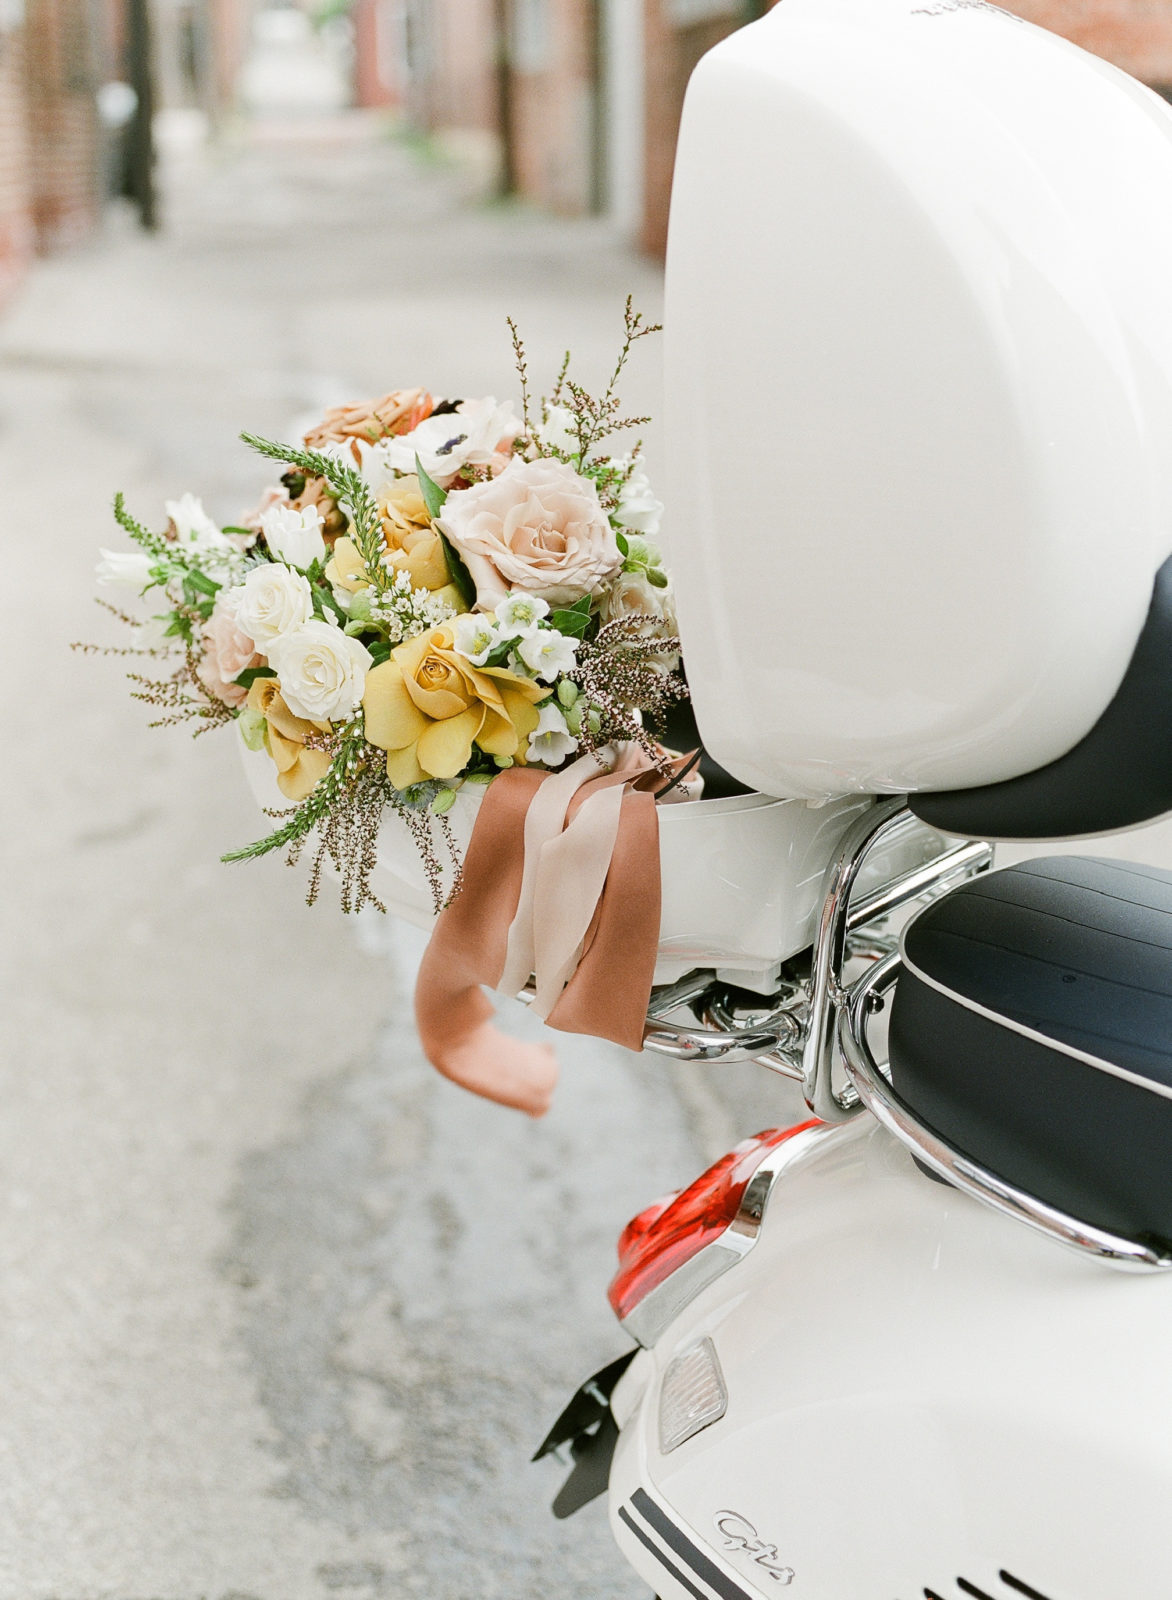 Bridal-Bouquet-in-Vespa-|-The-Wedding-Experience-|-Planning-and-Stationery-by-Nellie-Sparkman-|-Floral-by-Blue-Bouquet-KC-Wedding-Florist